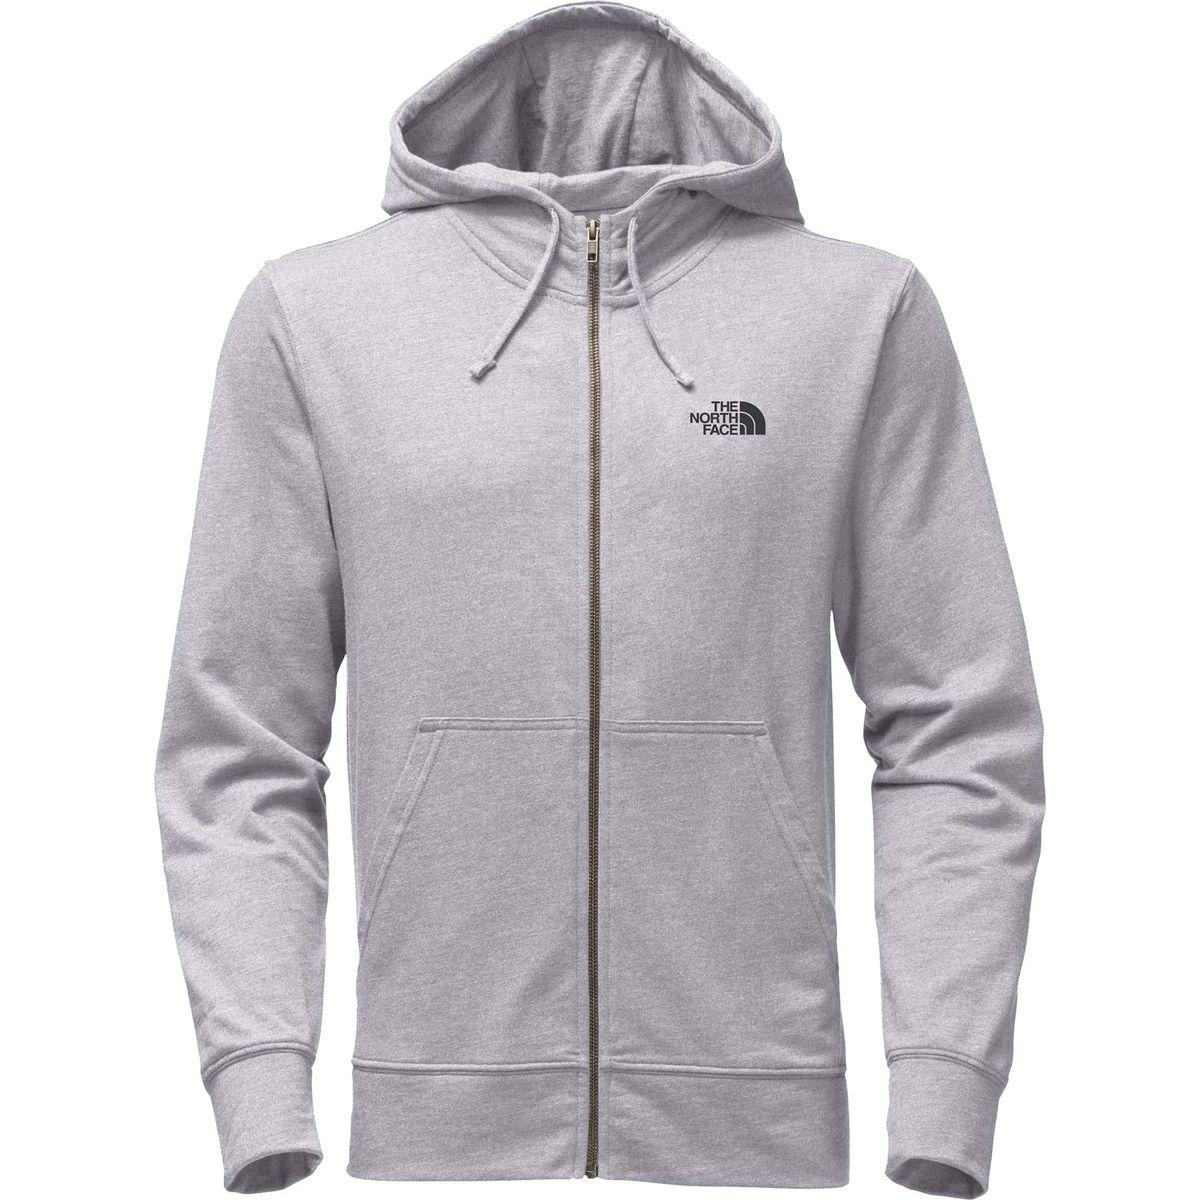 The North Face Cotton Backyard Full-zip Hoodie in Gray for Men - Lyst